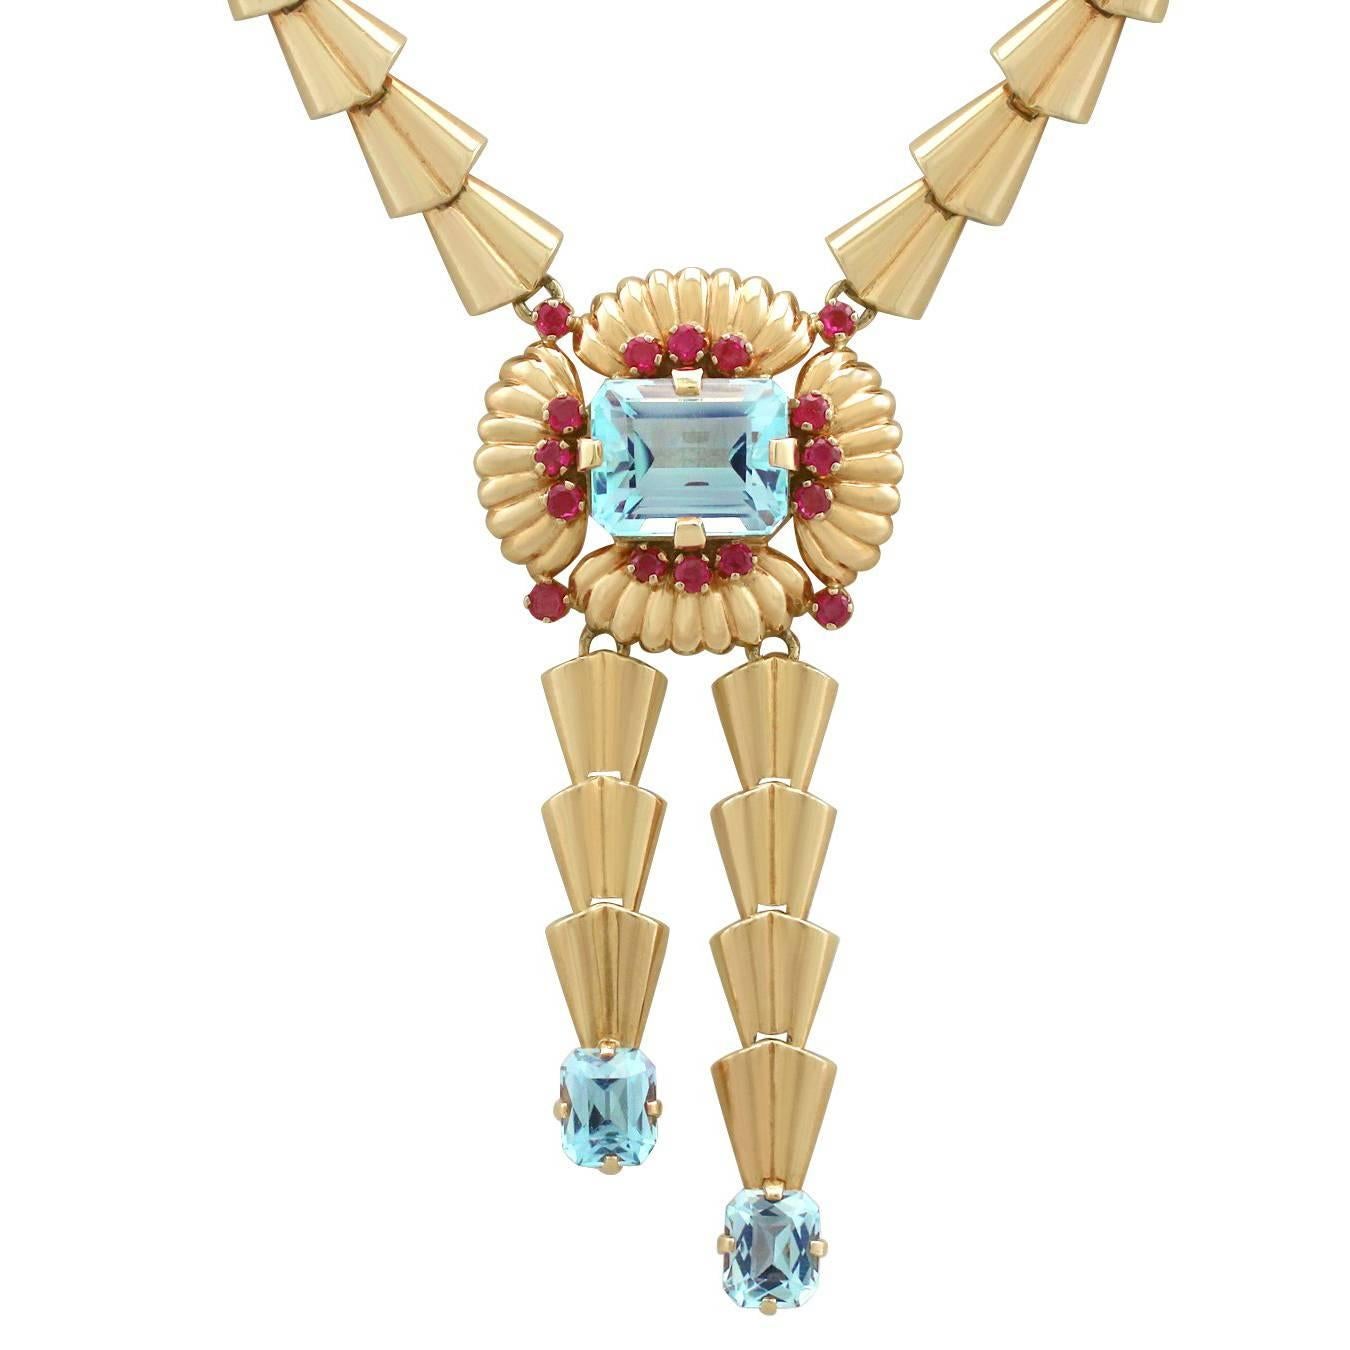 15.84 Carat Aquamarine and 1.28 Carat Ruby, Gold Necklace by Tiffany & Co.